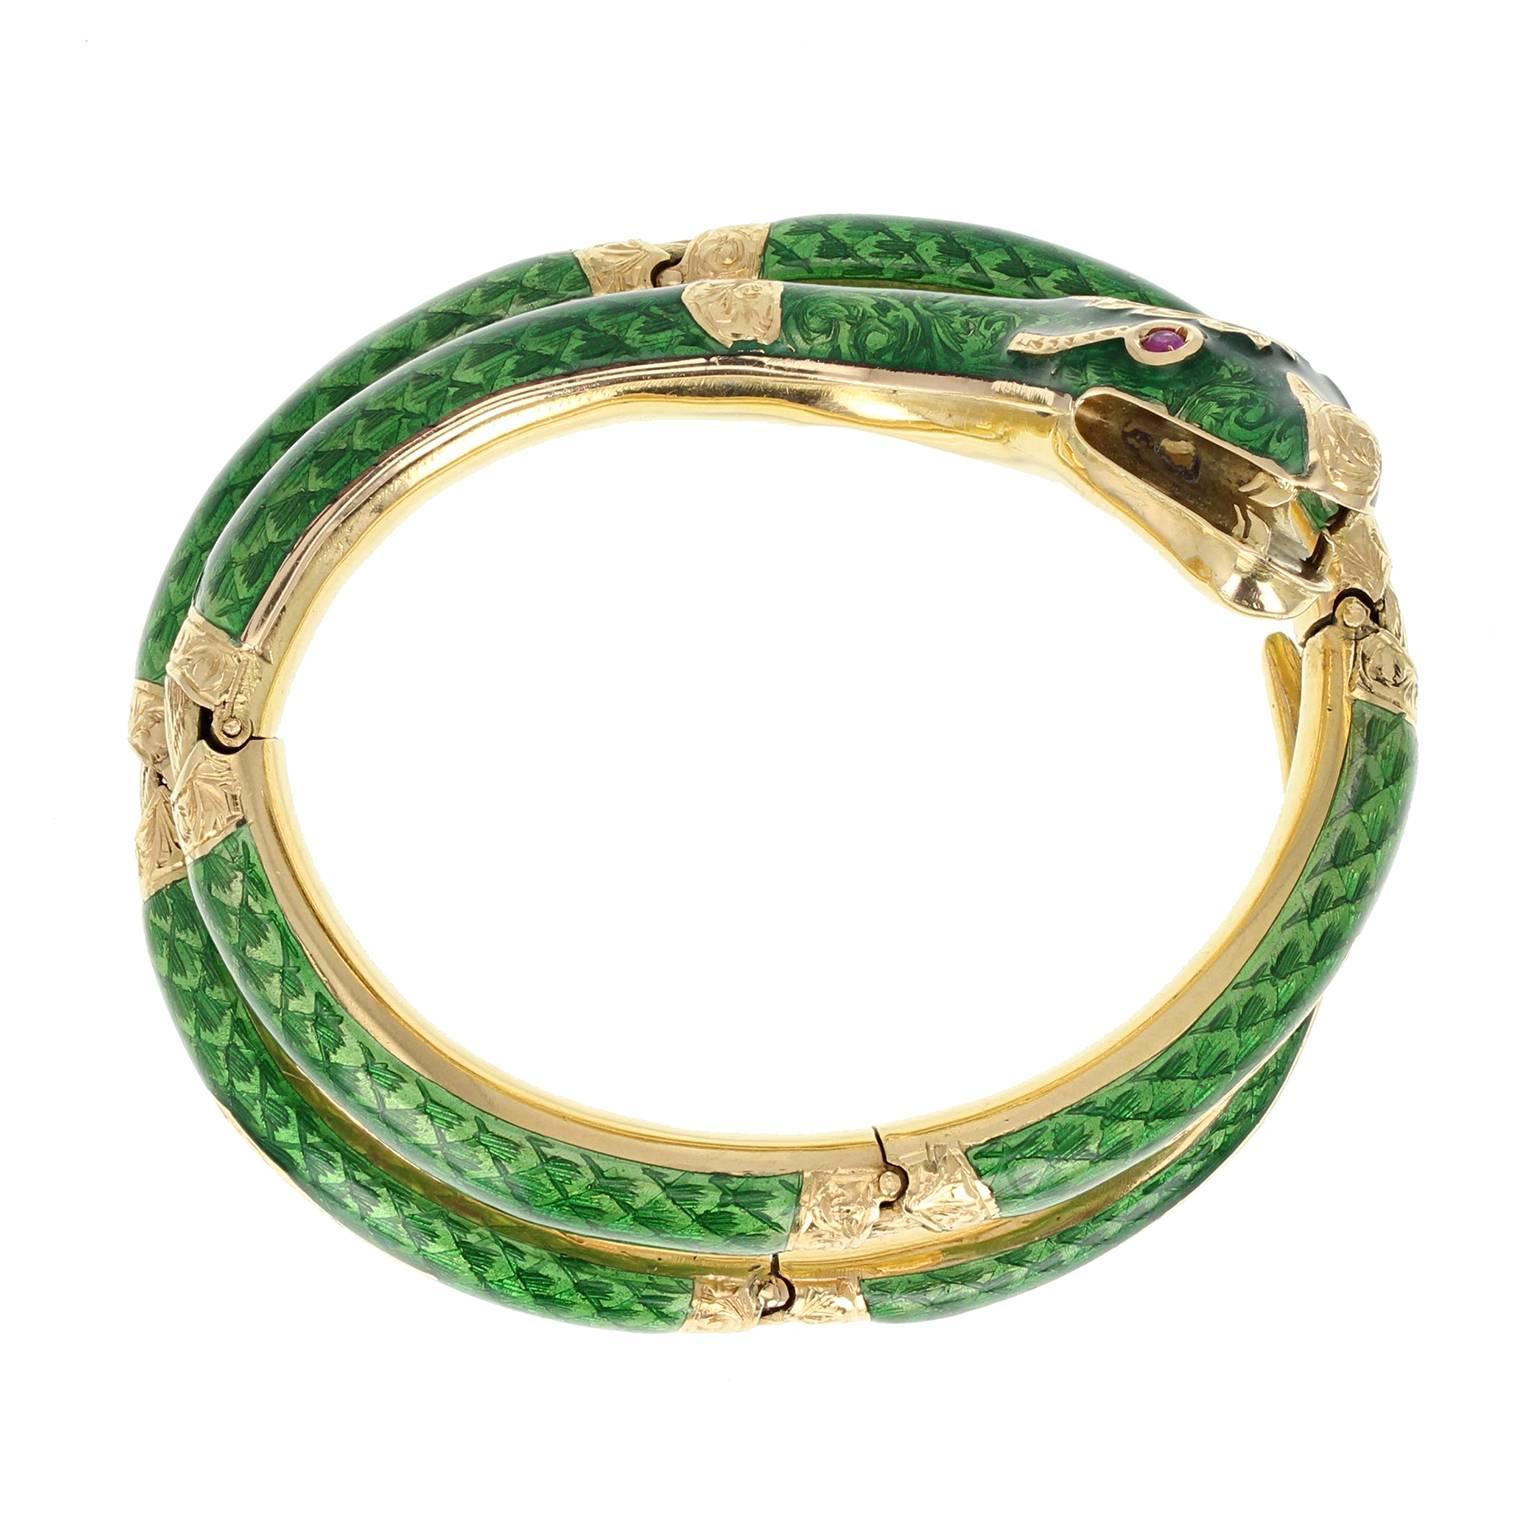 A fine and impressive serpent / snake bangle from c1950. The hinged, articulated bangle modelled as a coiled, hissing snake, it's body a bright and vibrant green guilloché enamel. The head adorned with a single marquise-cut diamond and two Burma